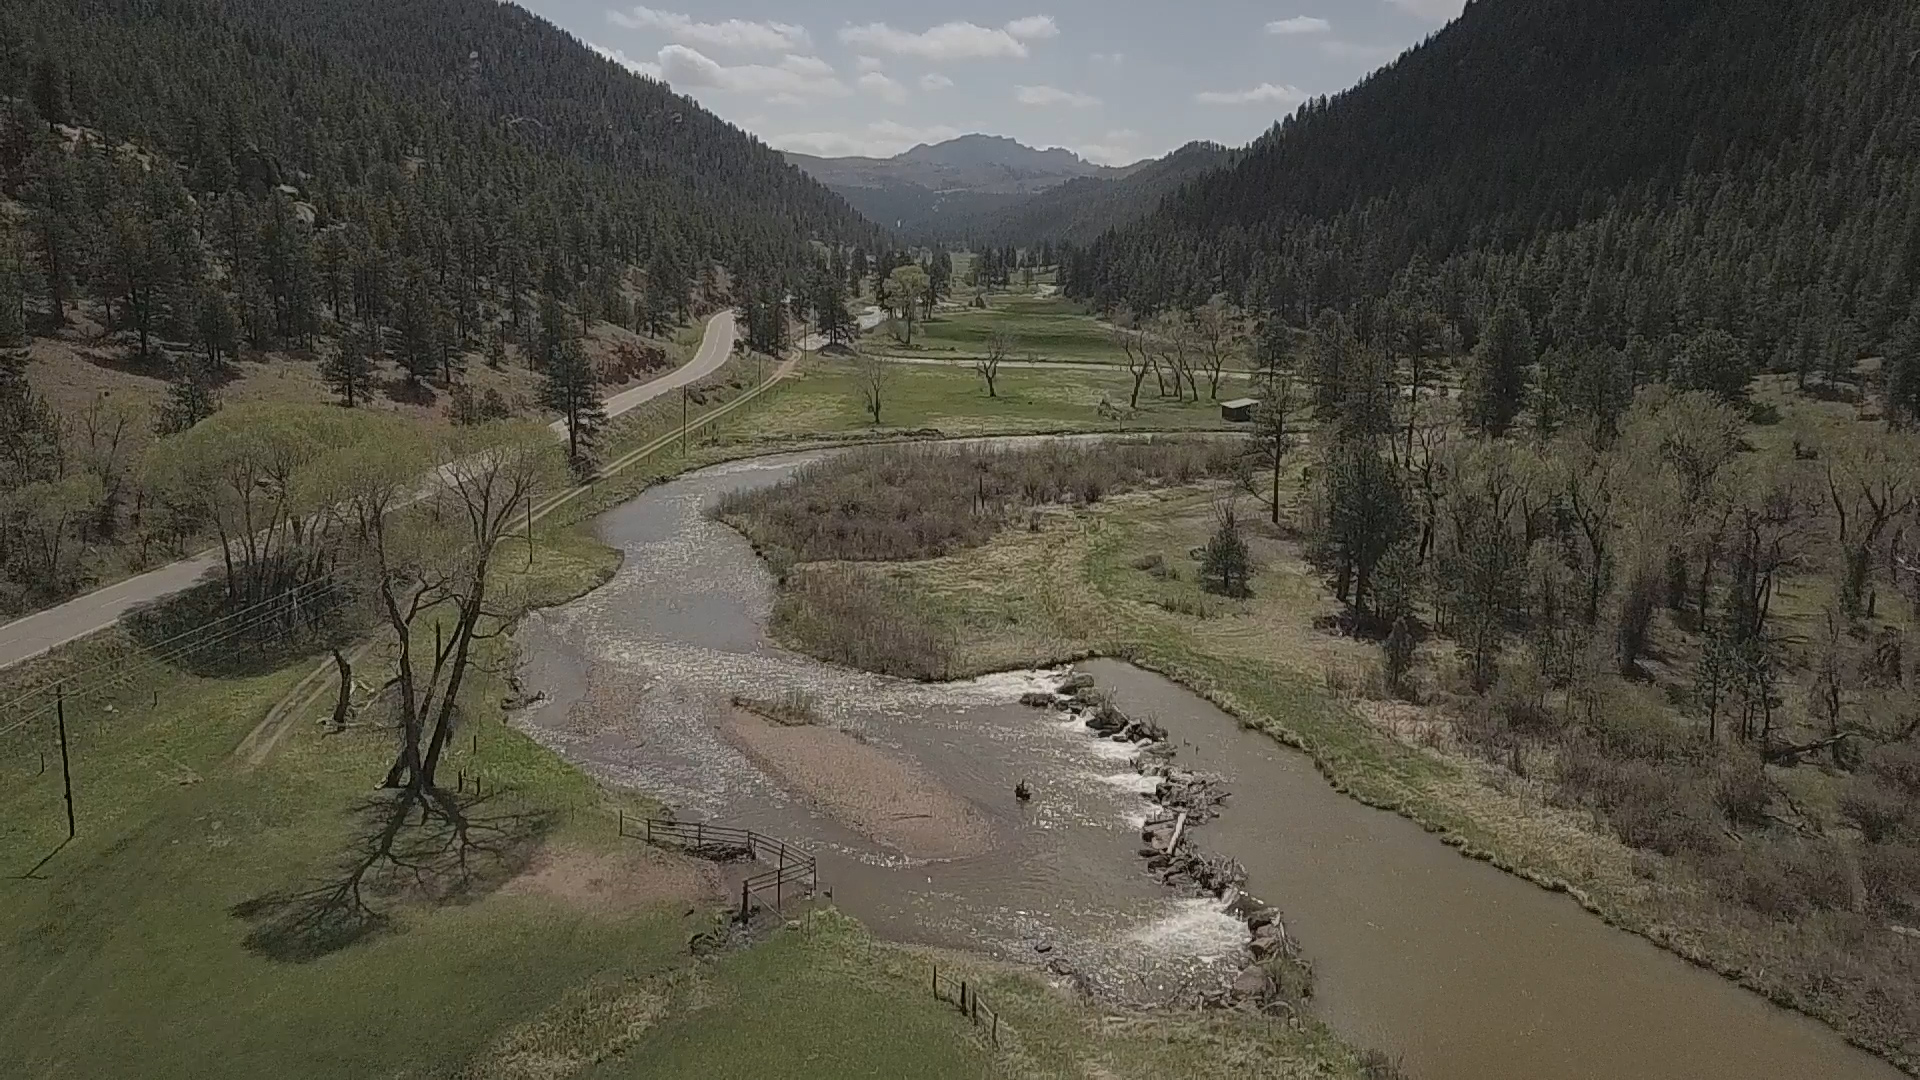 The North Fork of the South Platte River flows through beautiful landscapes near Pine on its way to the confluence southwest of Denver.